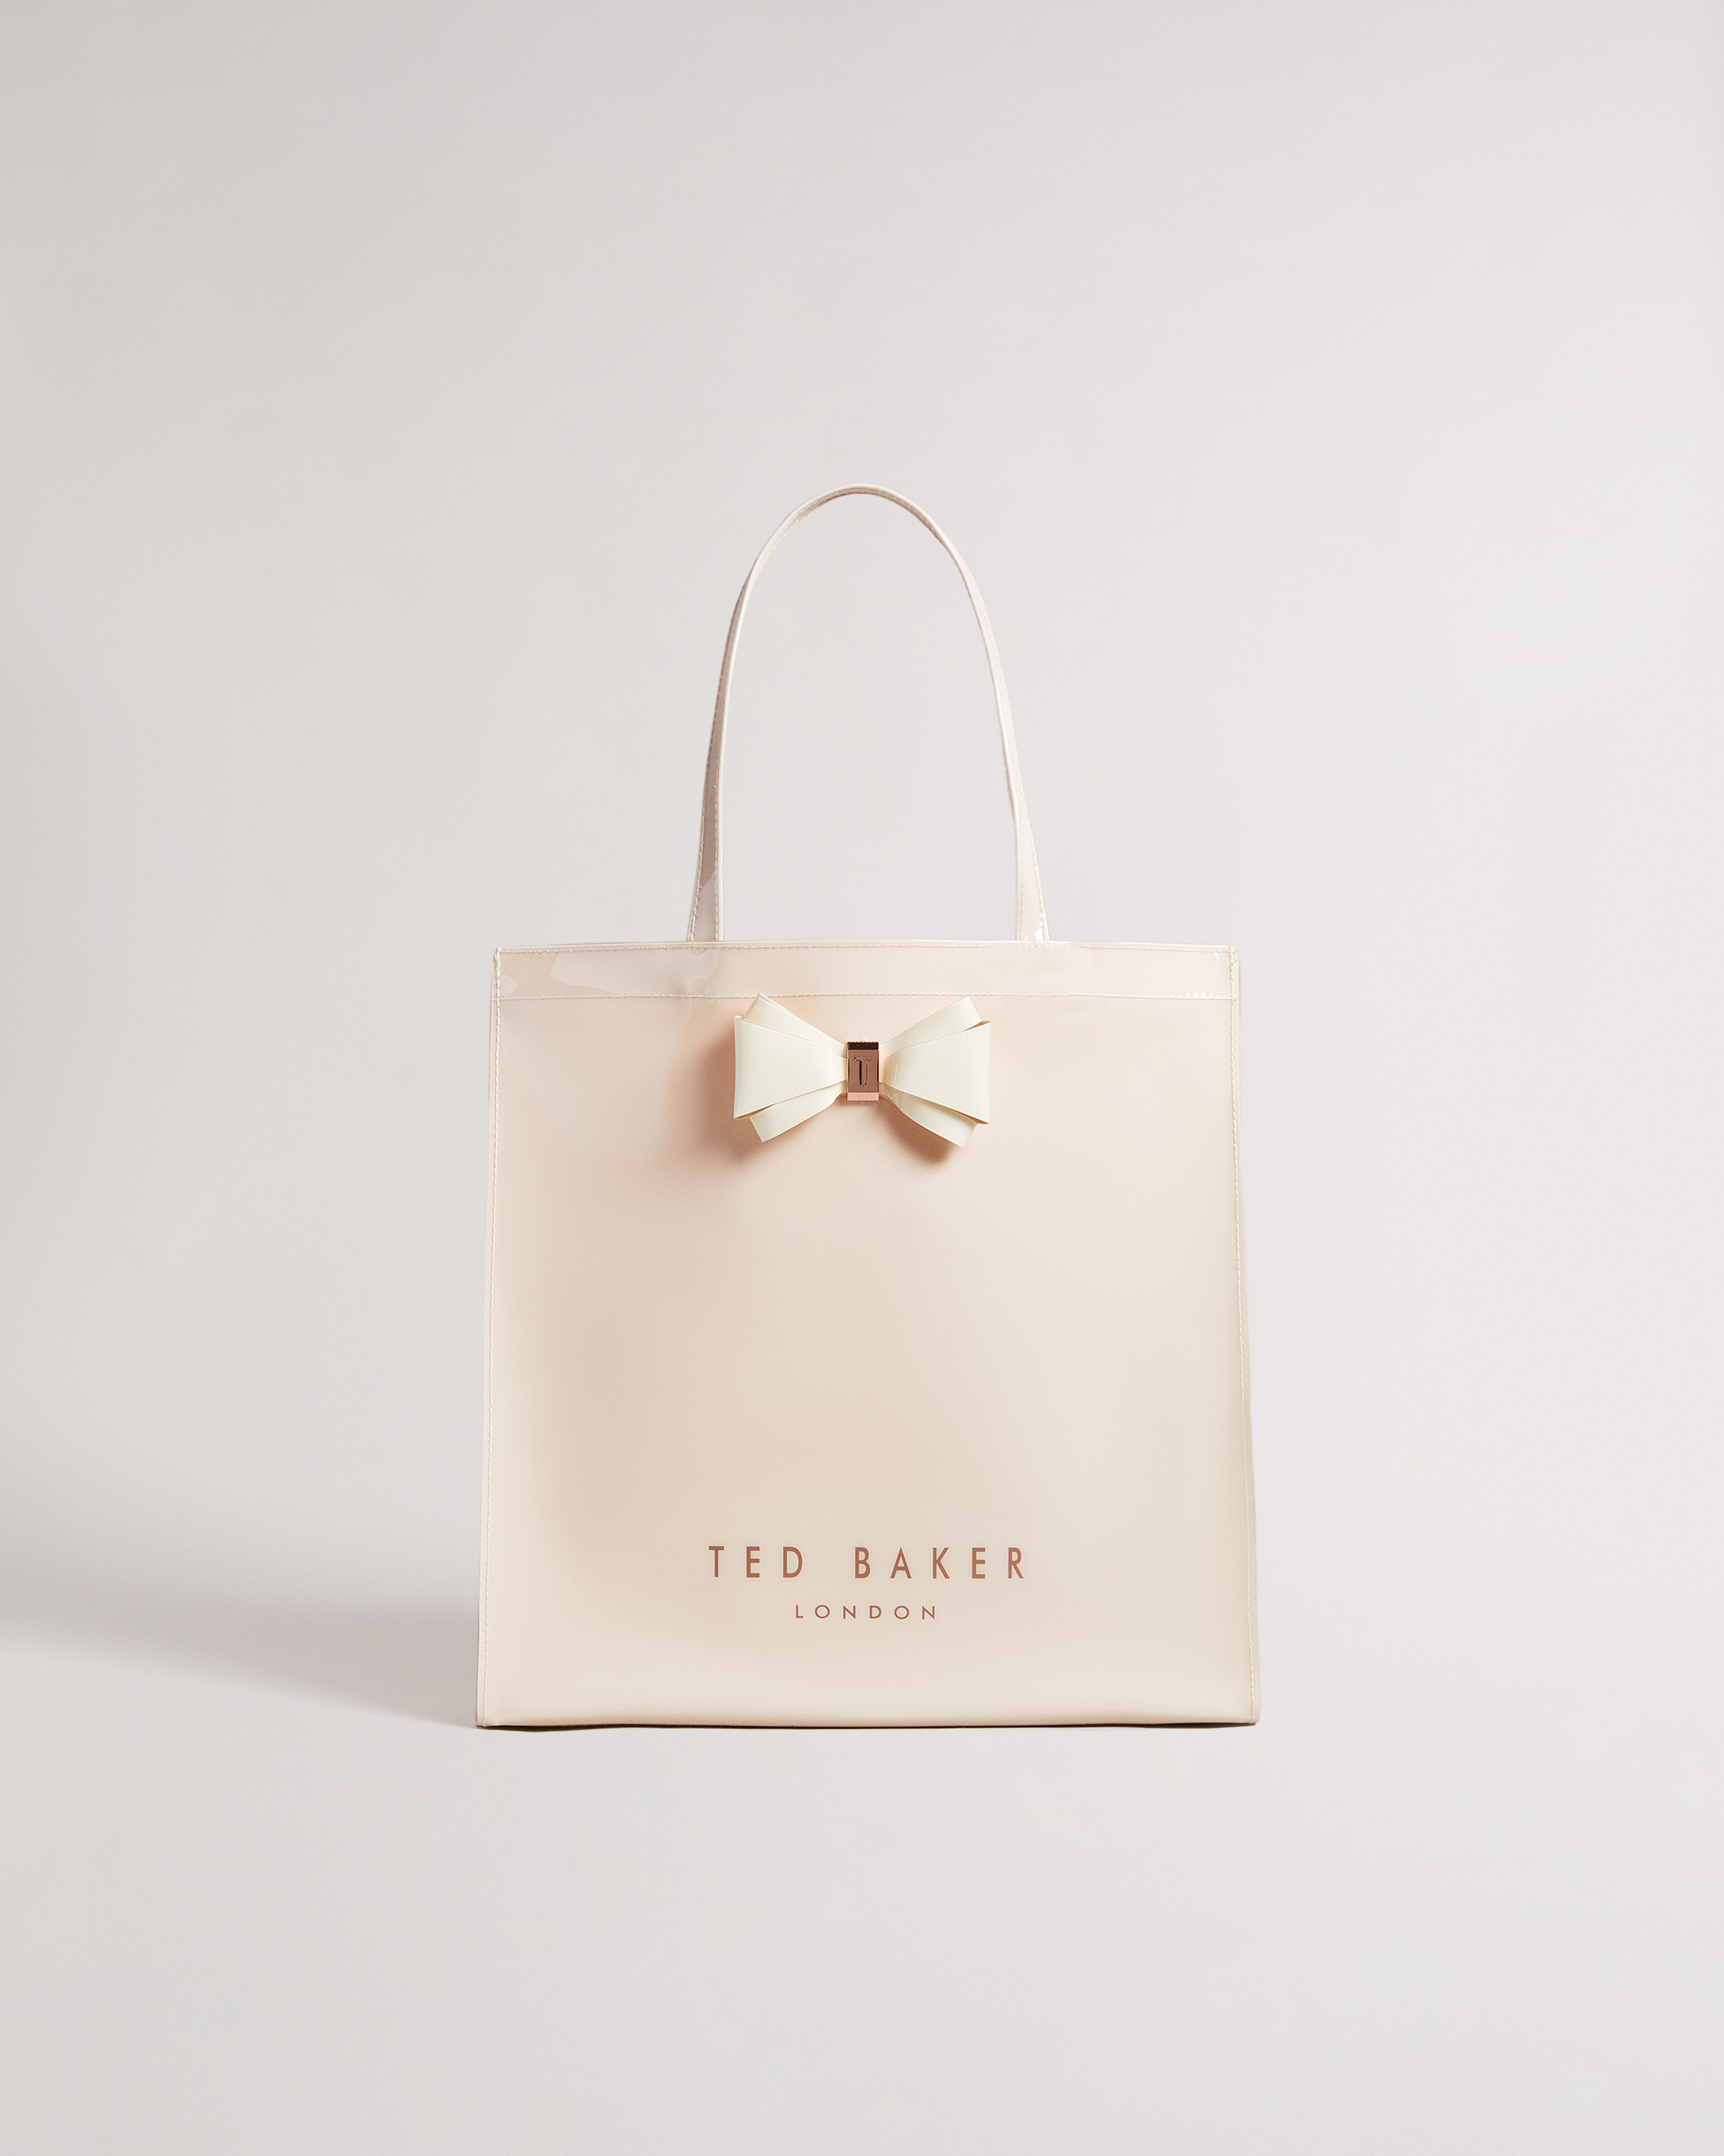 Ted Baker Packaging Case Study